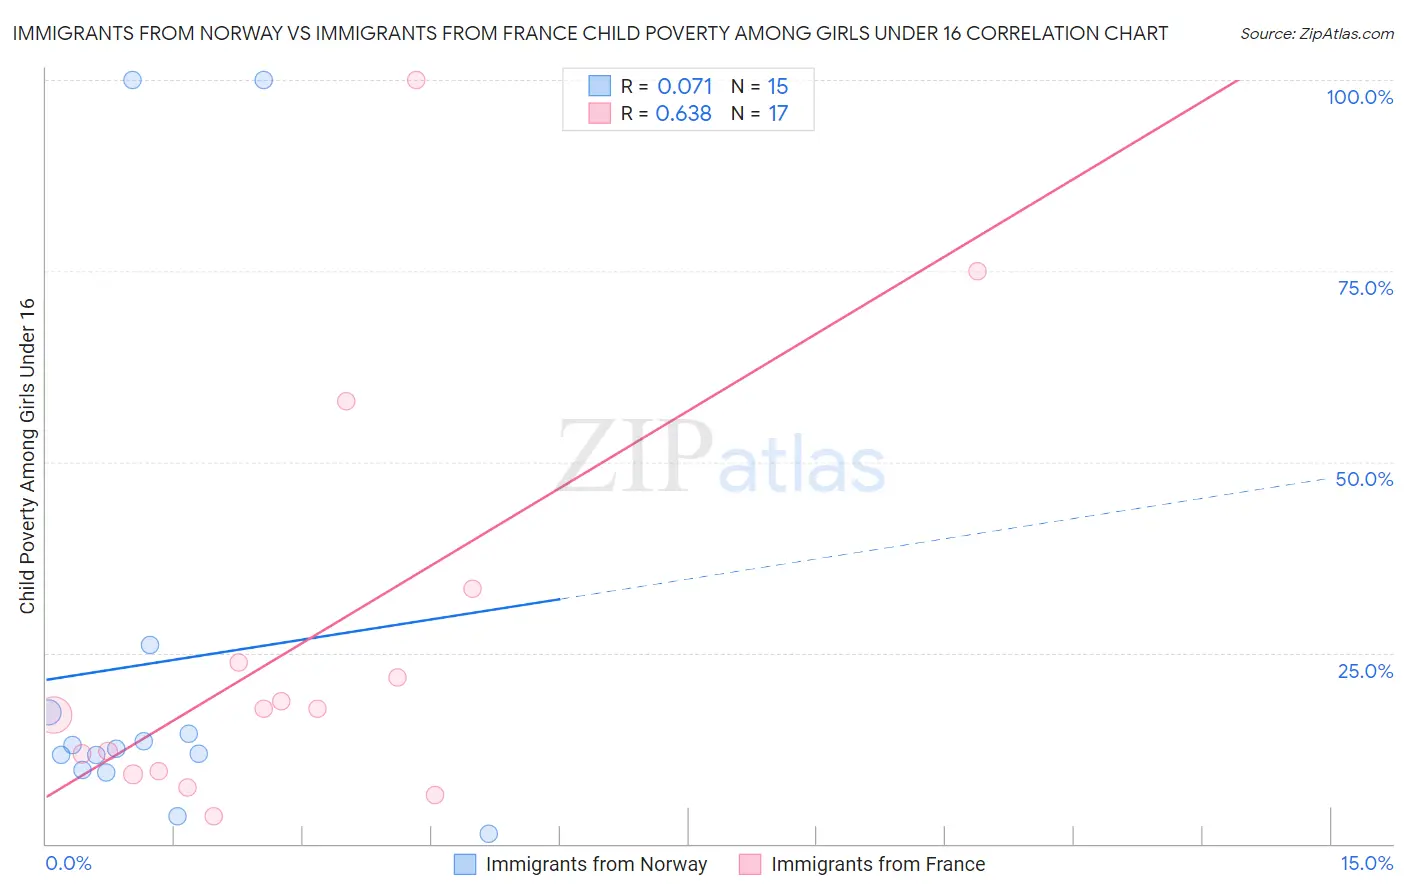 Immigrants from Norway vs Immigrants from France Child Poverty Among Girls Under 16